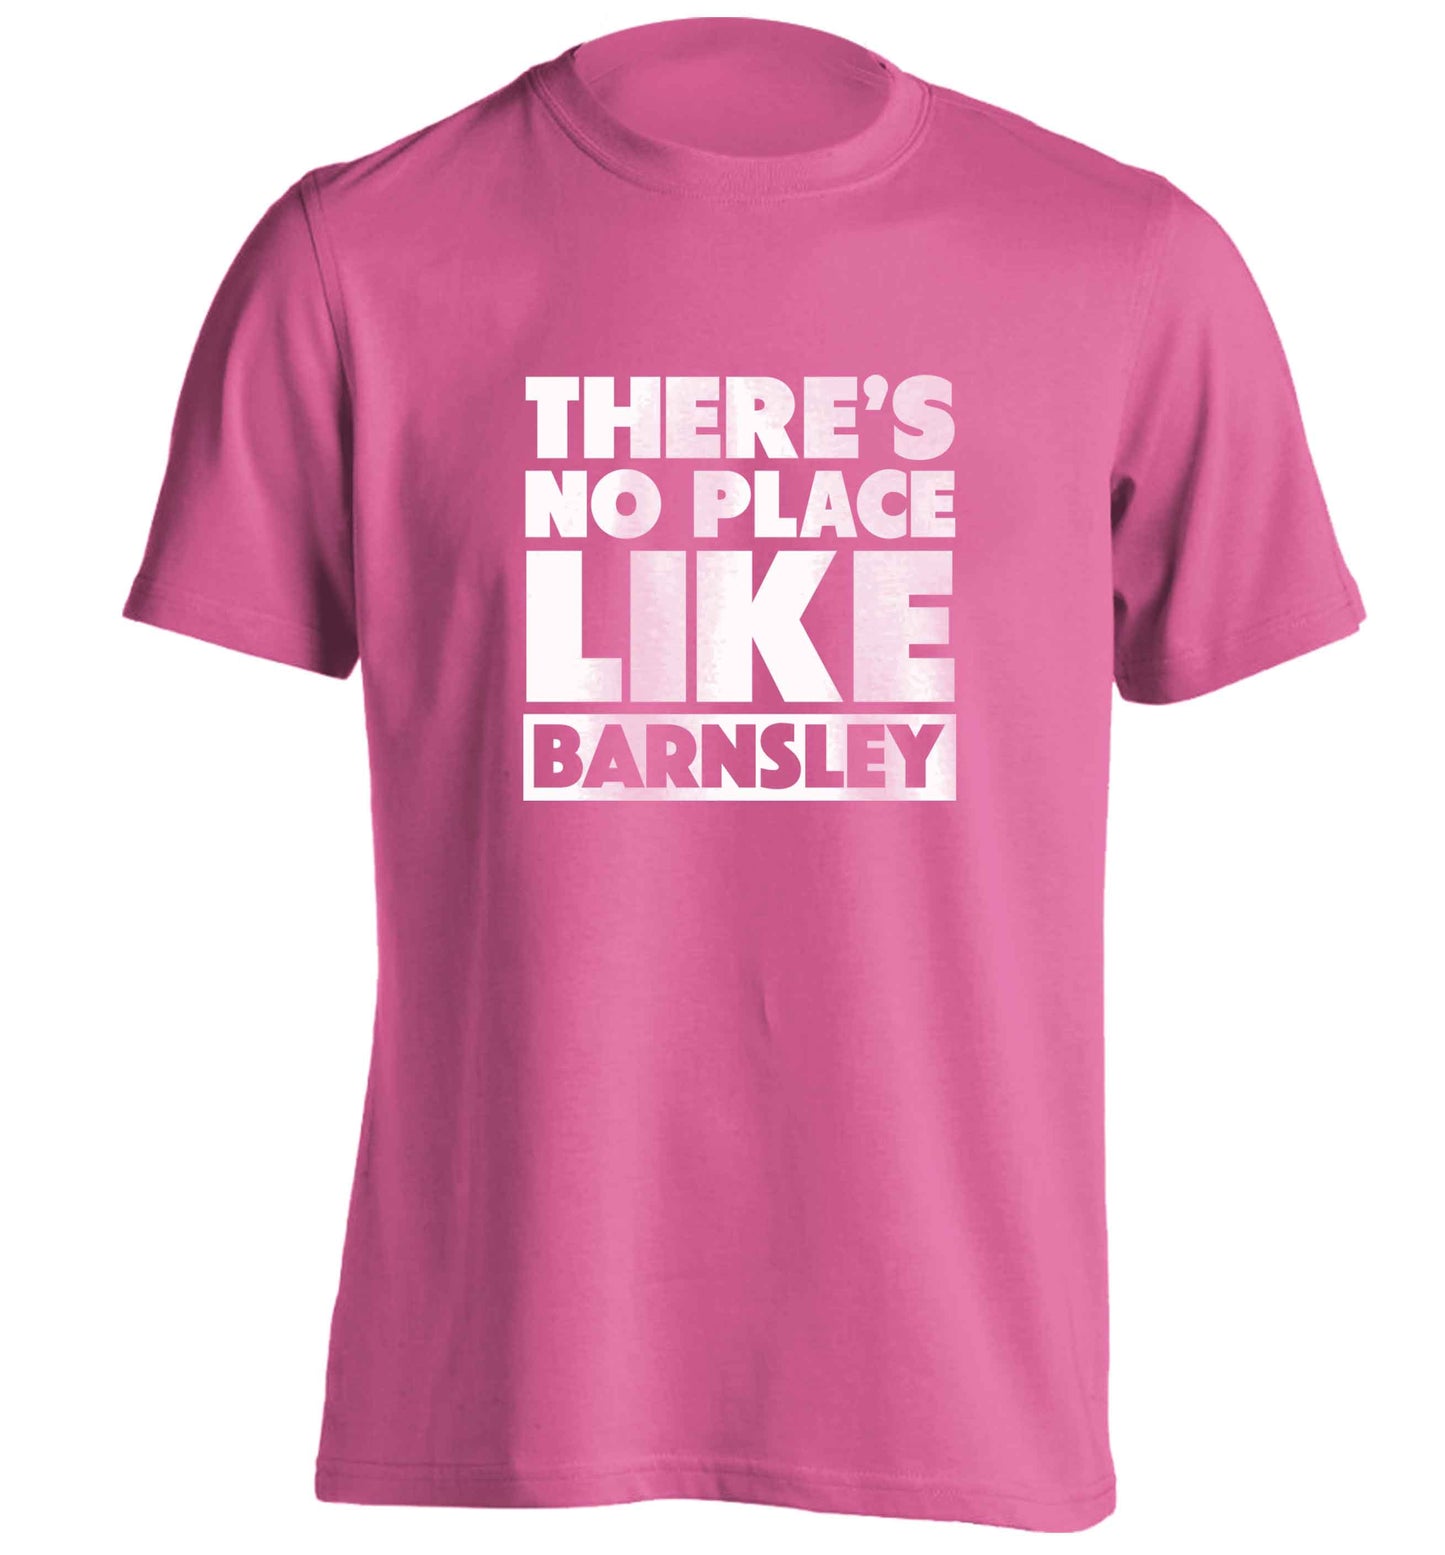 There's No Place Like Barnsley adults unisex pink Tshirt 2XL